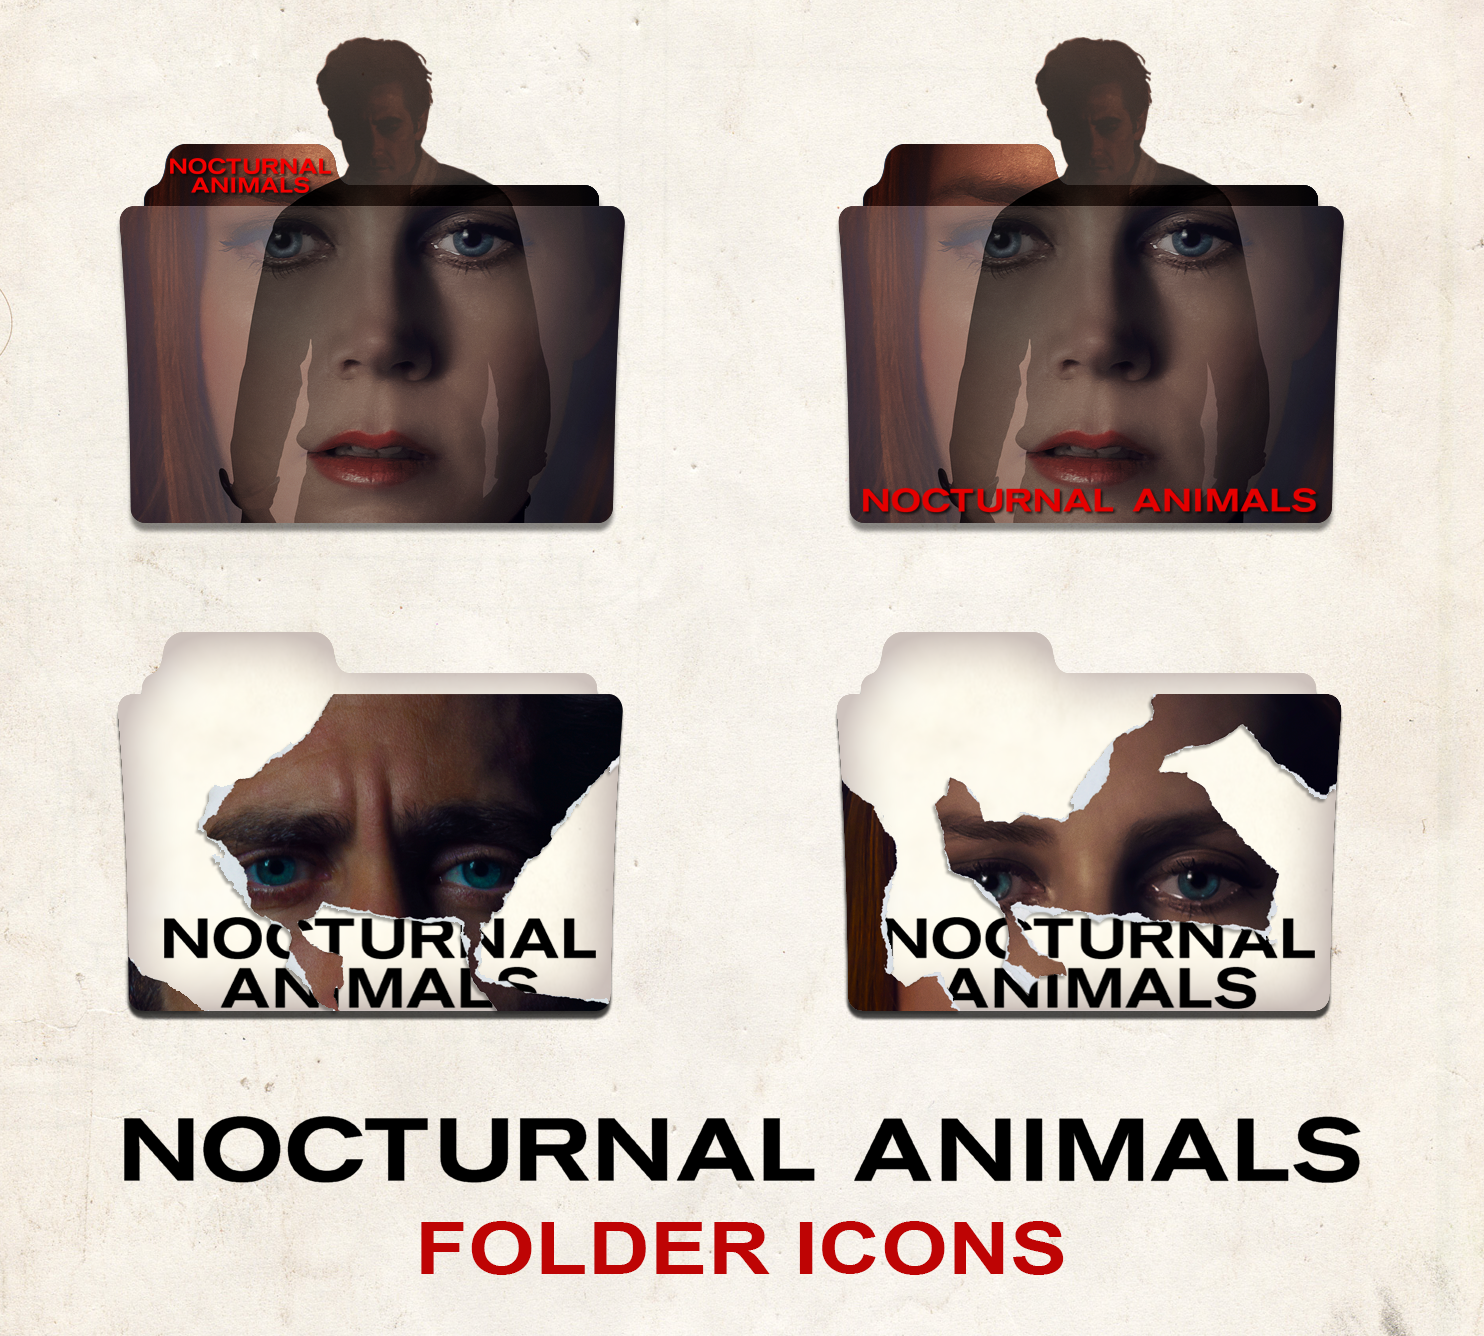 Nocturnal Animals Folder Icons by Zifis on DeviantArt